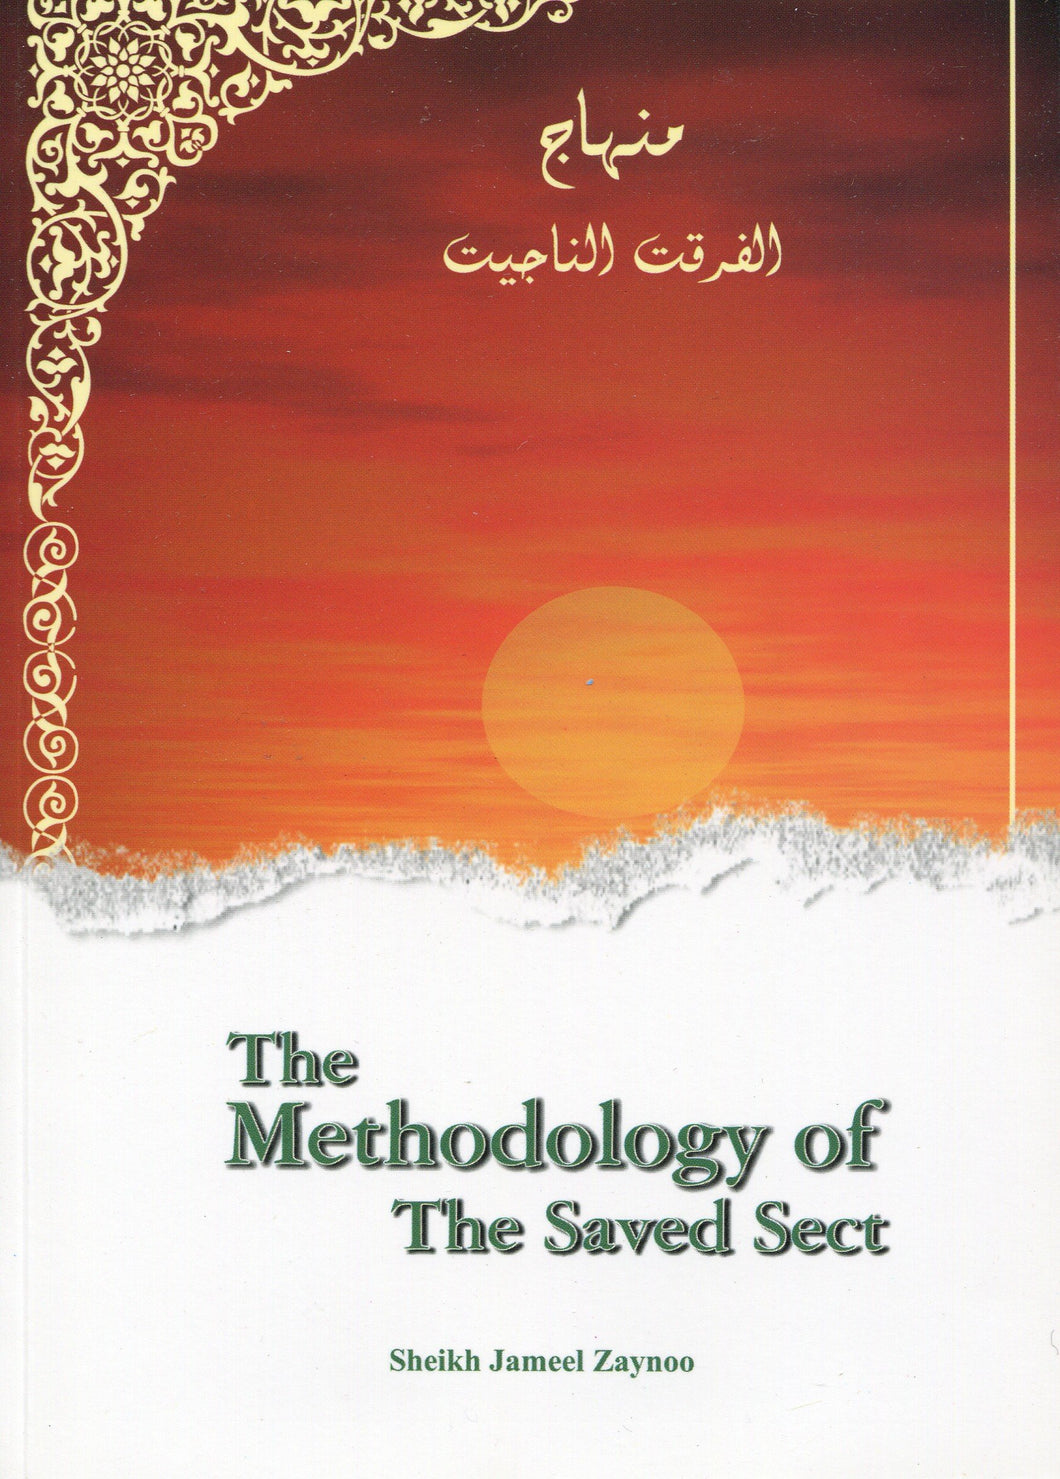 The Methodology of the Saved Sect